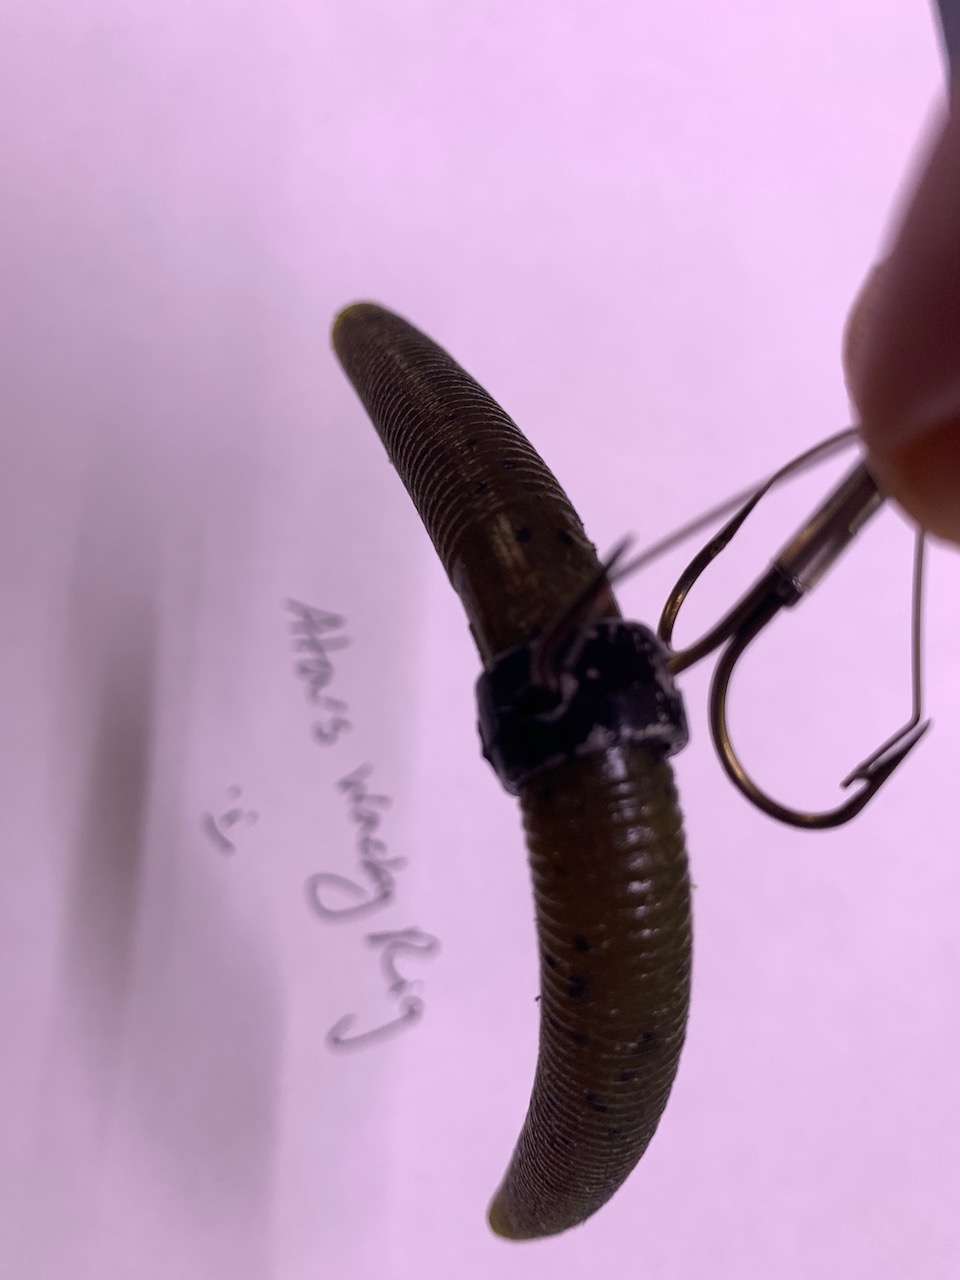 Wacky worm hooks? - General Discussion Forum - General Discussion